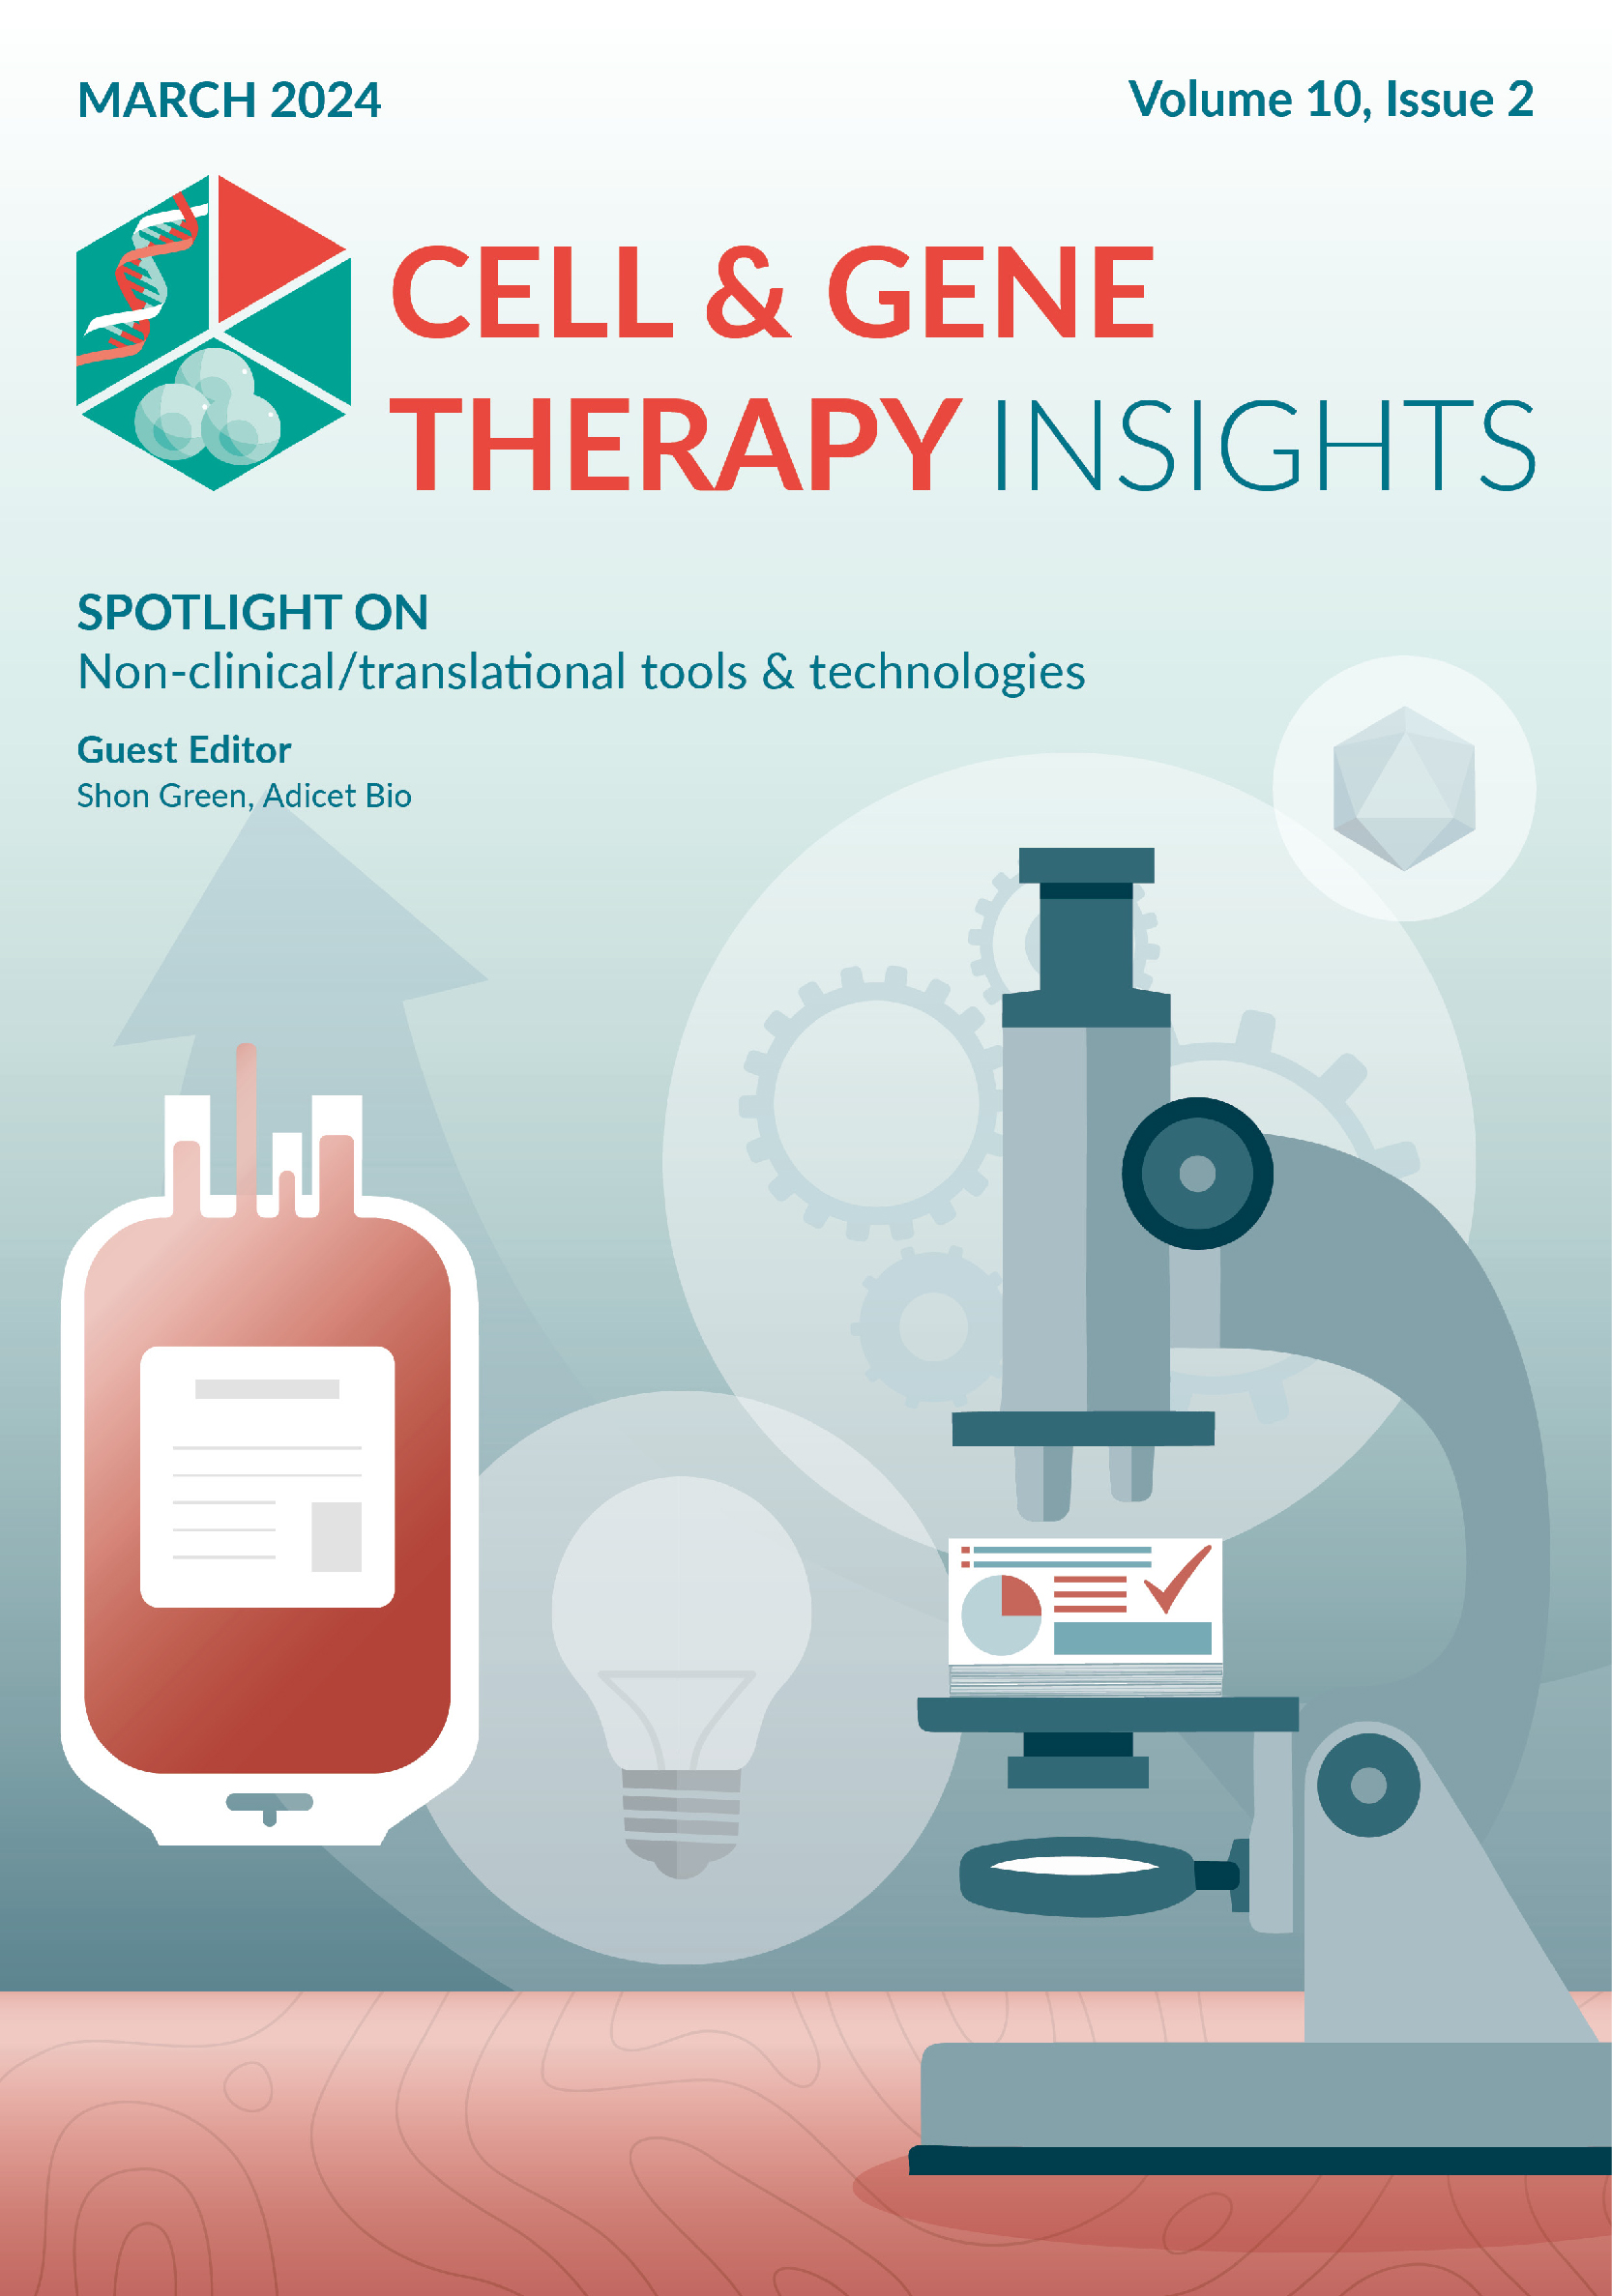 Cell and Gene Therapy Insights Vol 10 Issue 2